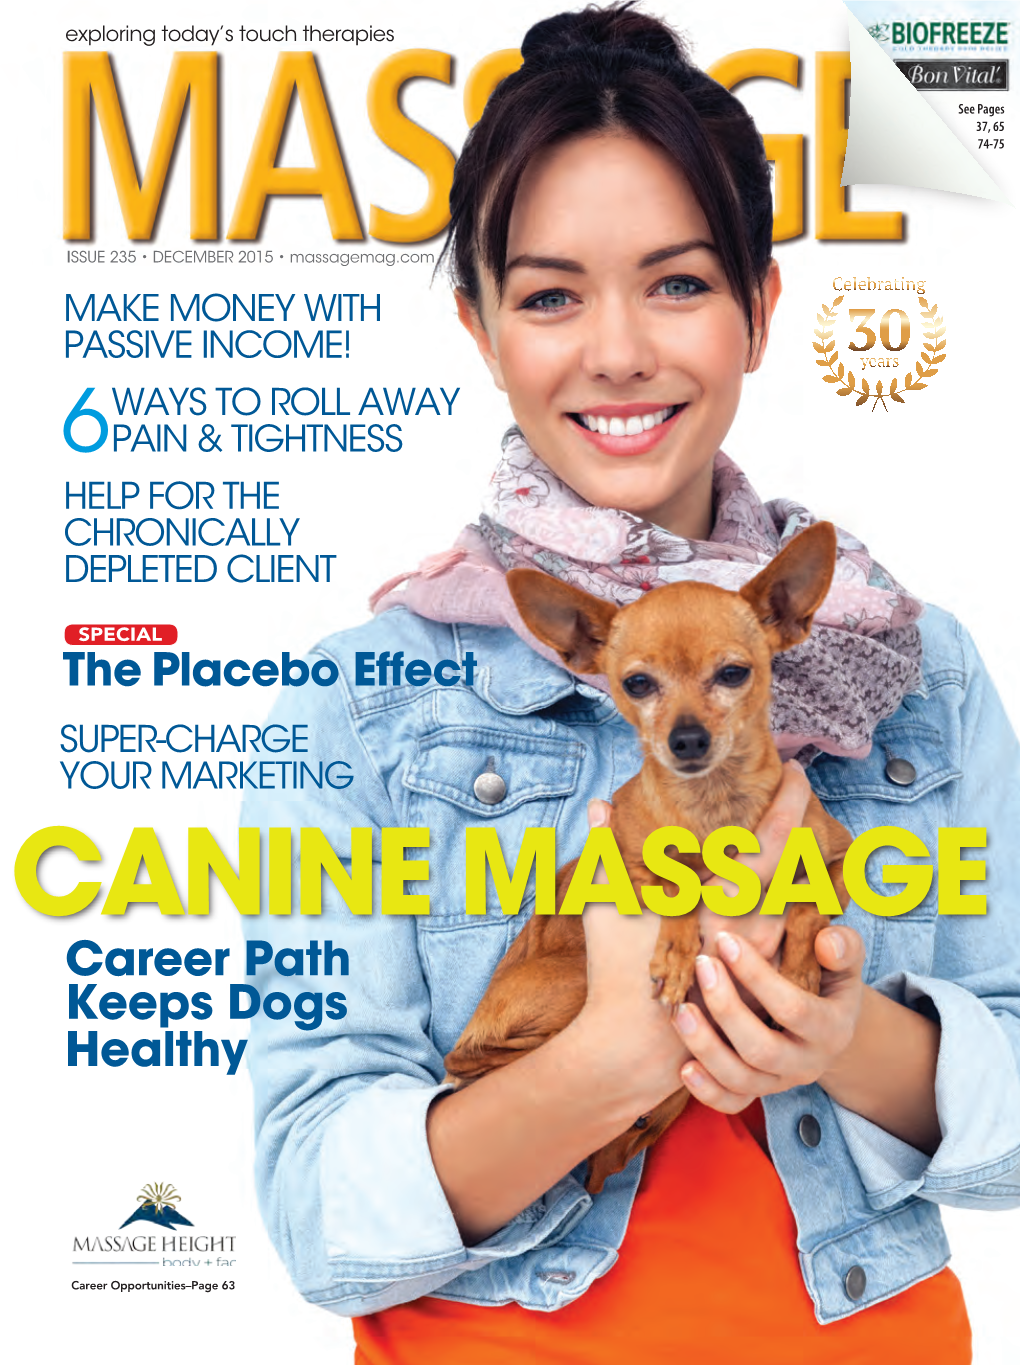 CANINE MASSAGE Career Path Keeps Dogs Healthy